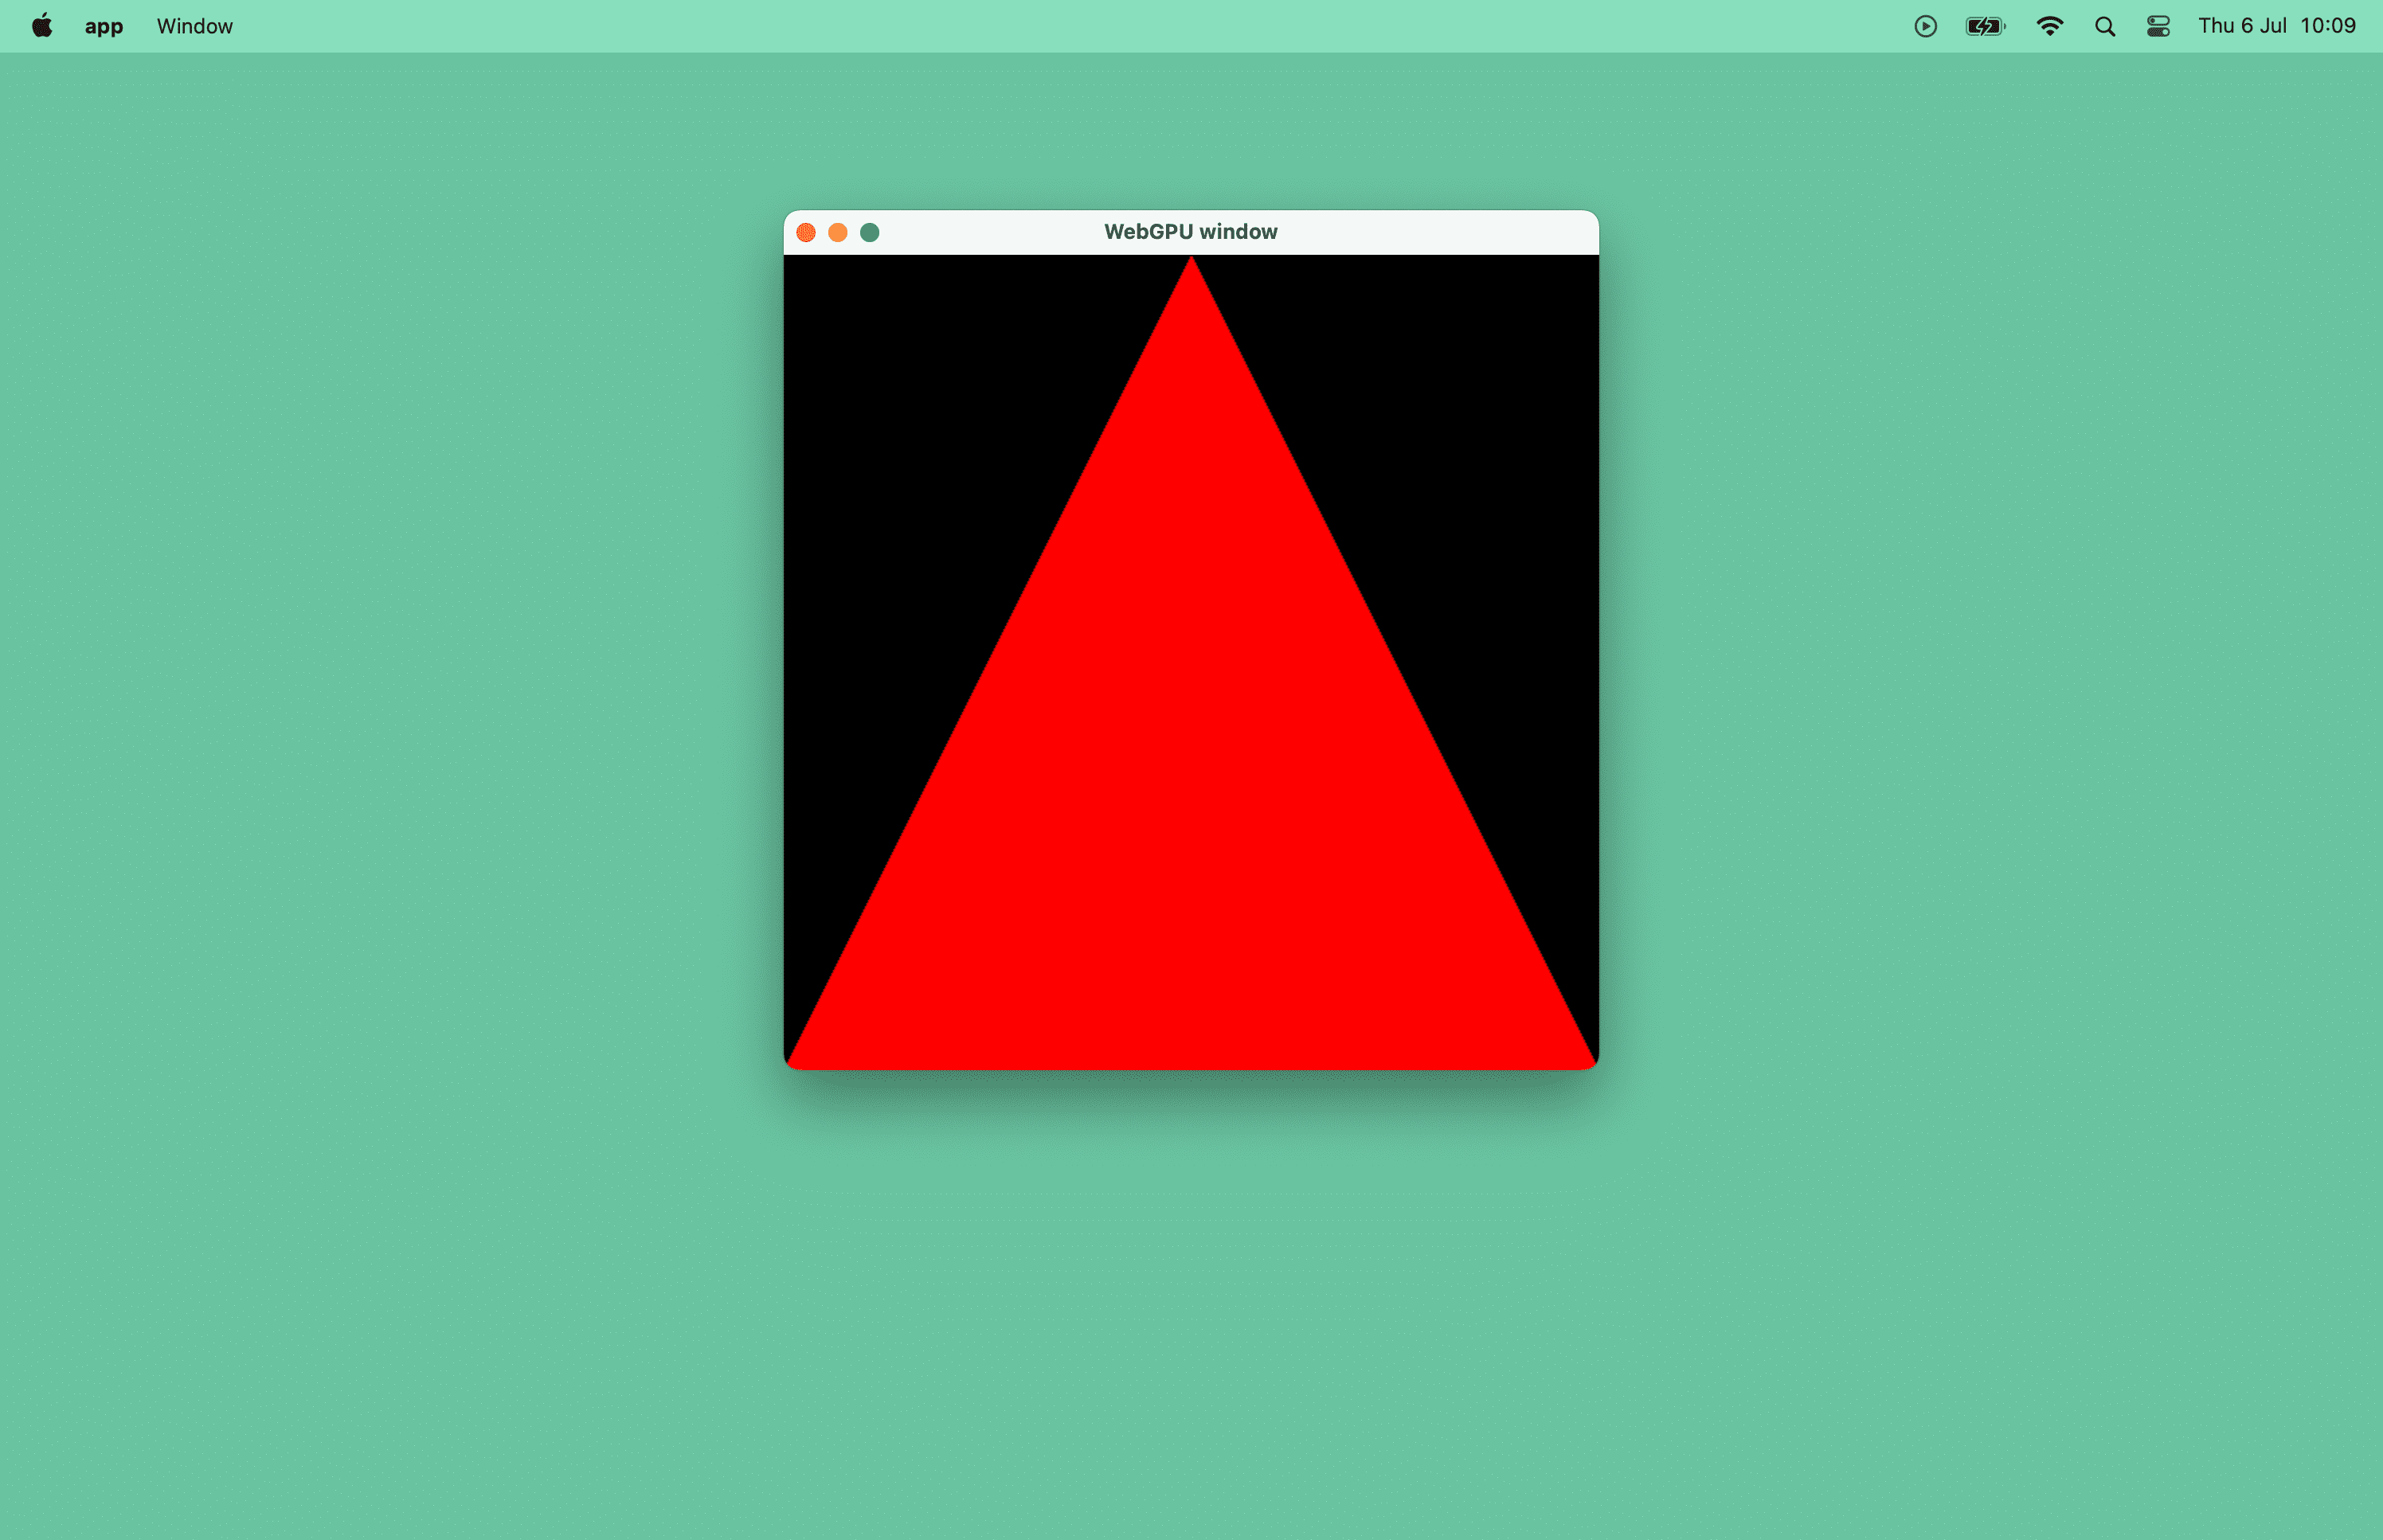 Screenshot of a red triangle in a macOS window.